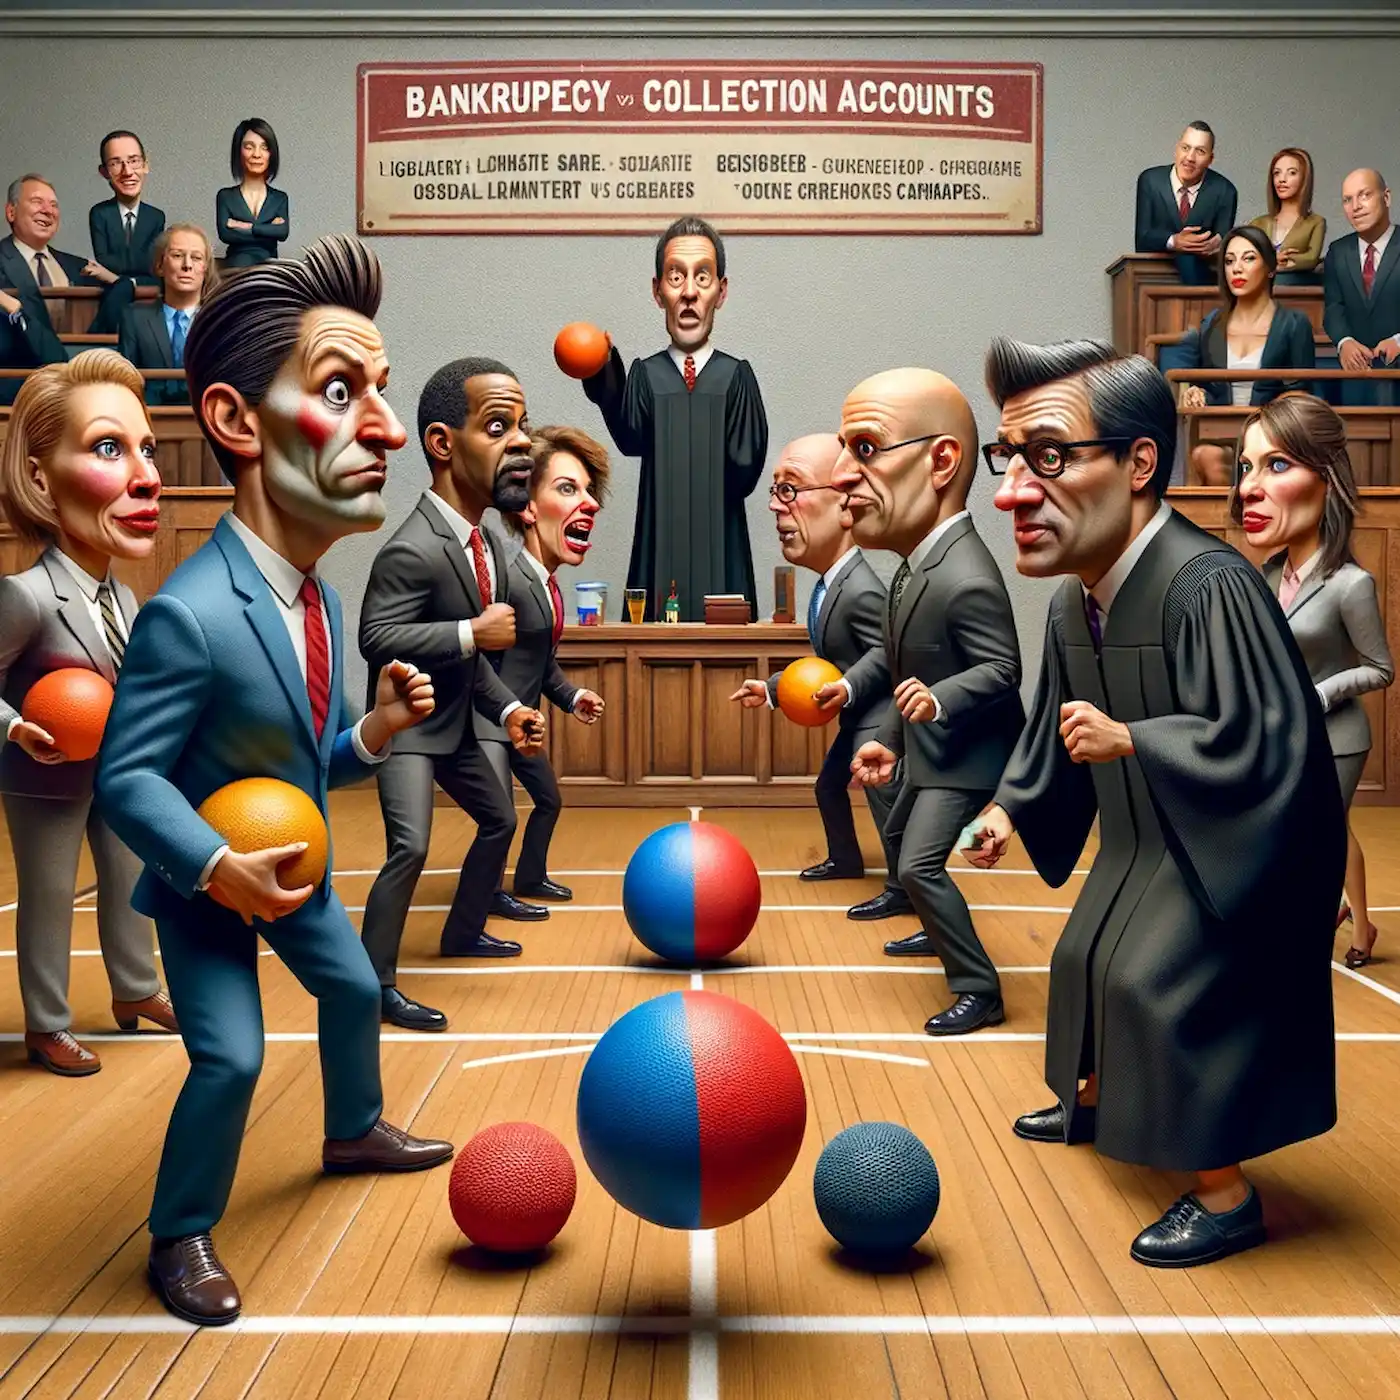 Bankruptcy Dodgeball For Collection Accounts